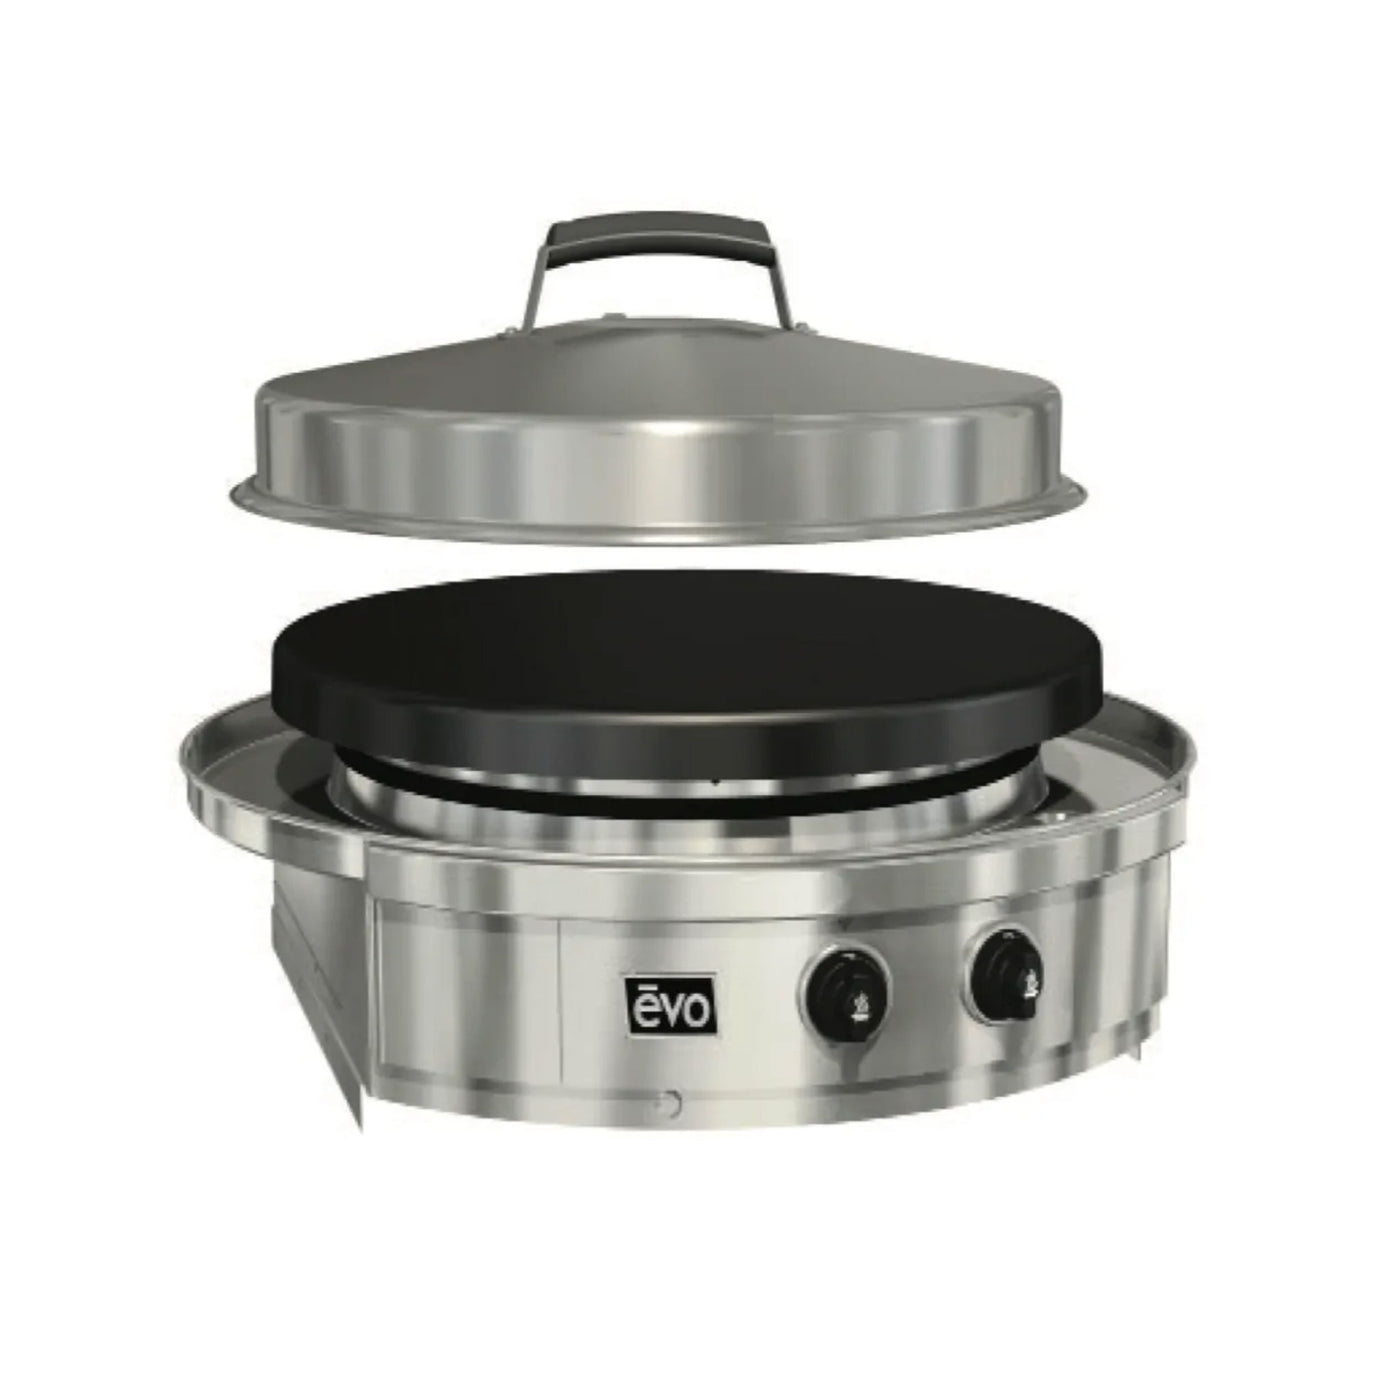 25" Built-In Circular Outdoor Cooktop, Stainless Steel Affinity 25G